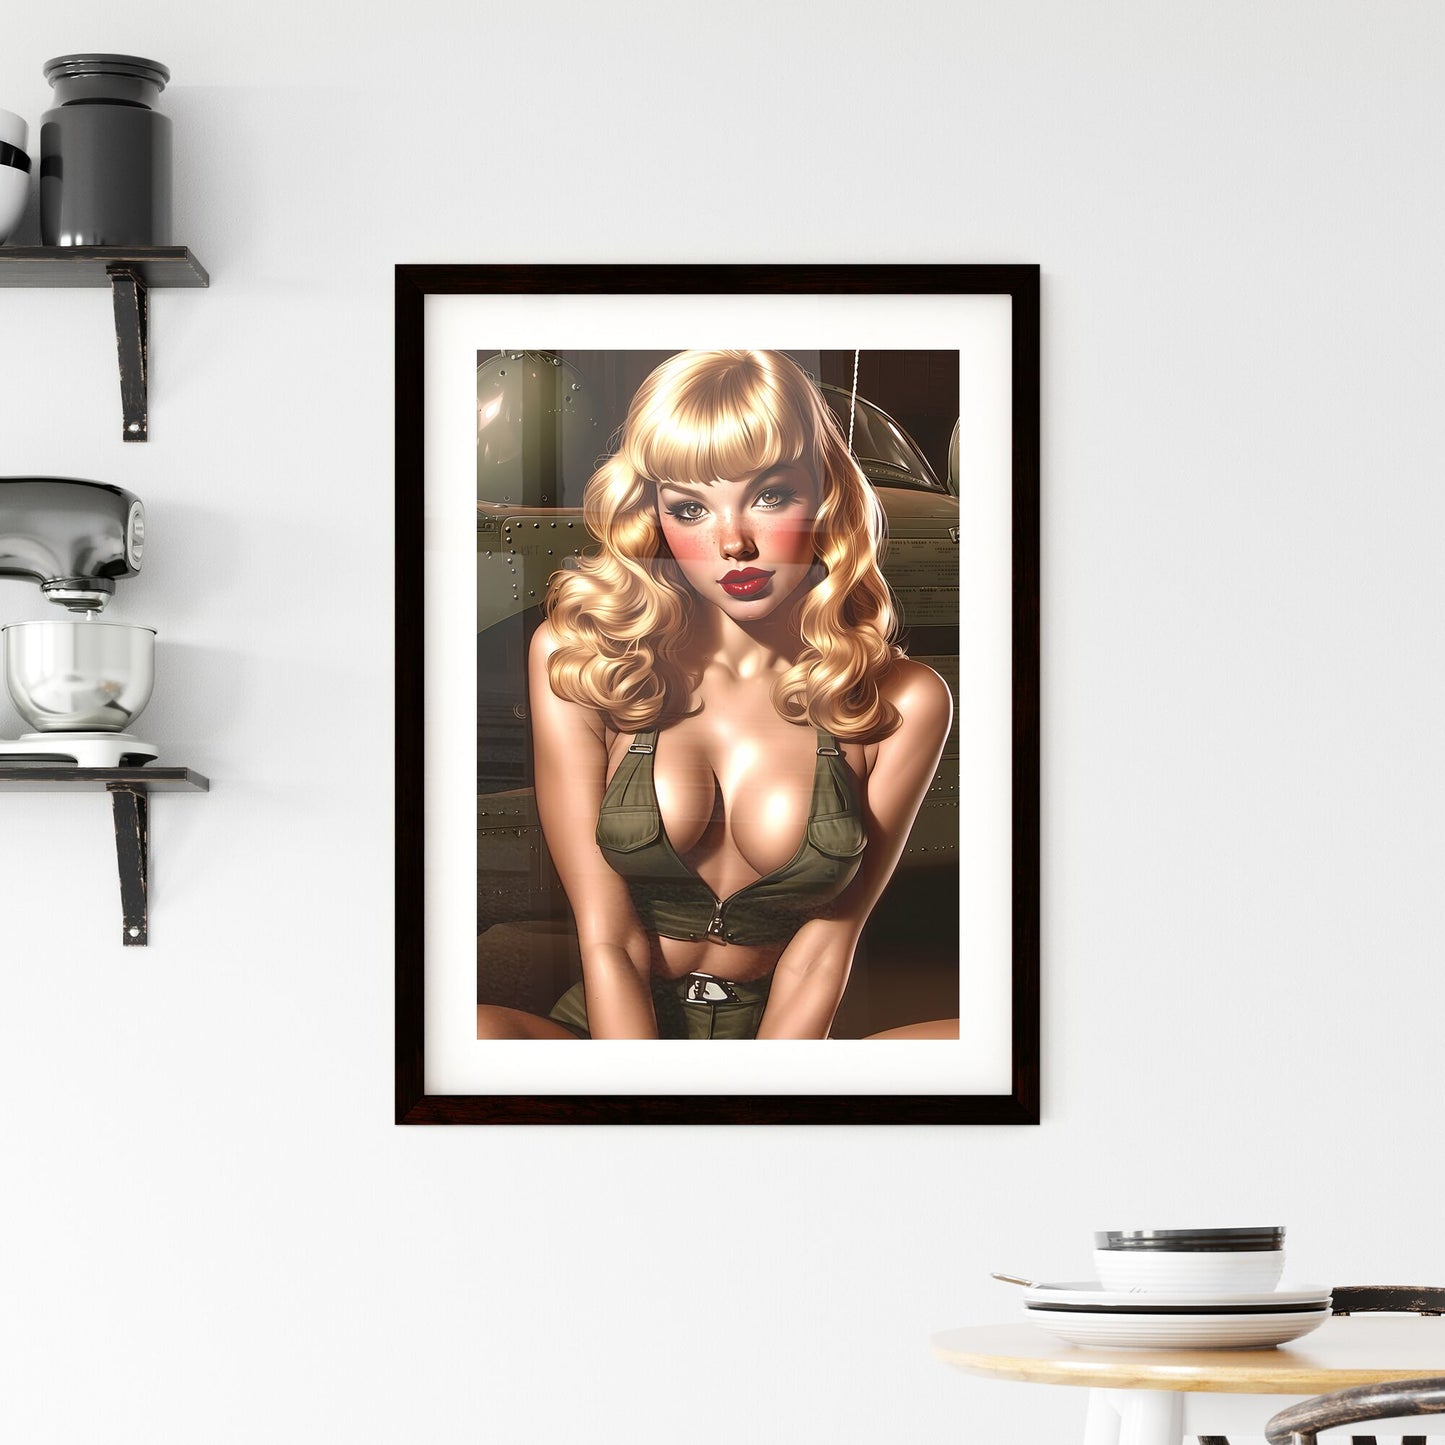 1950's pin up, has blond hair, red lipstick - Art print of a reception desk in a hotel lobby Default Title